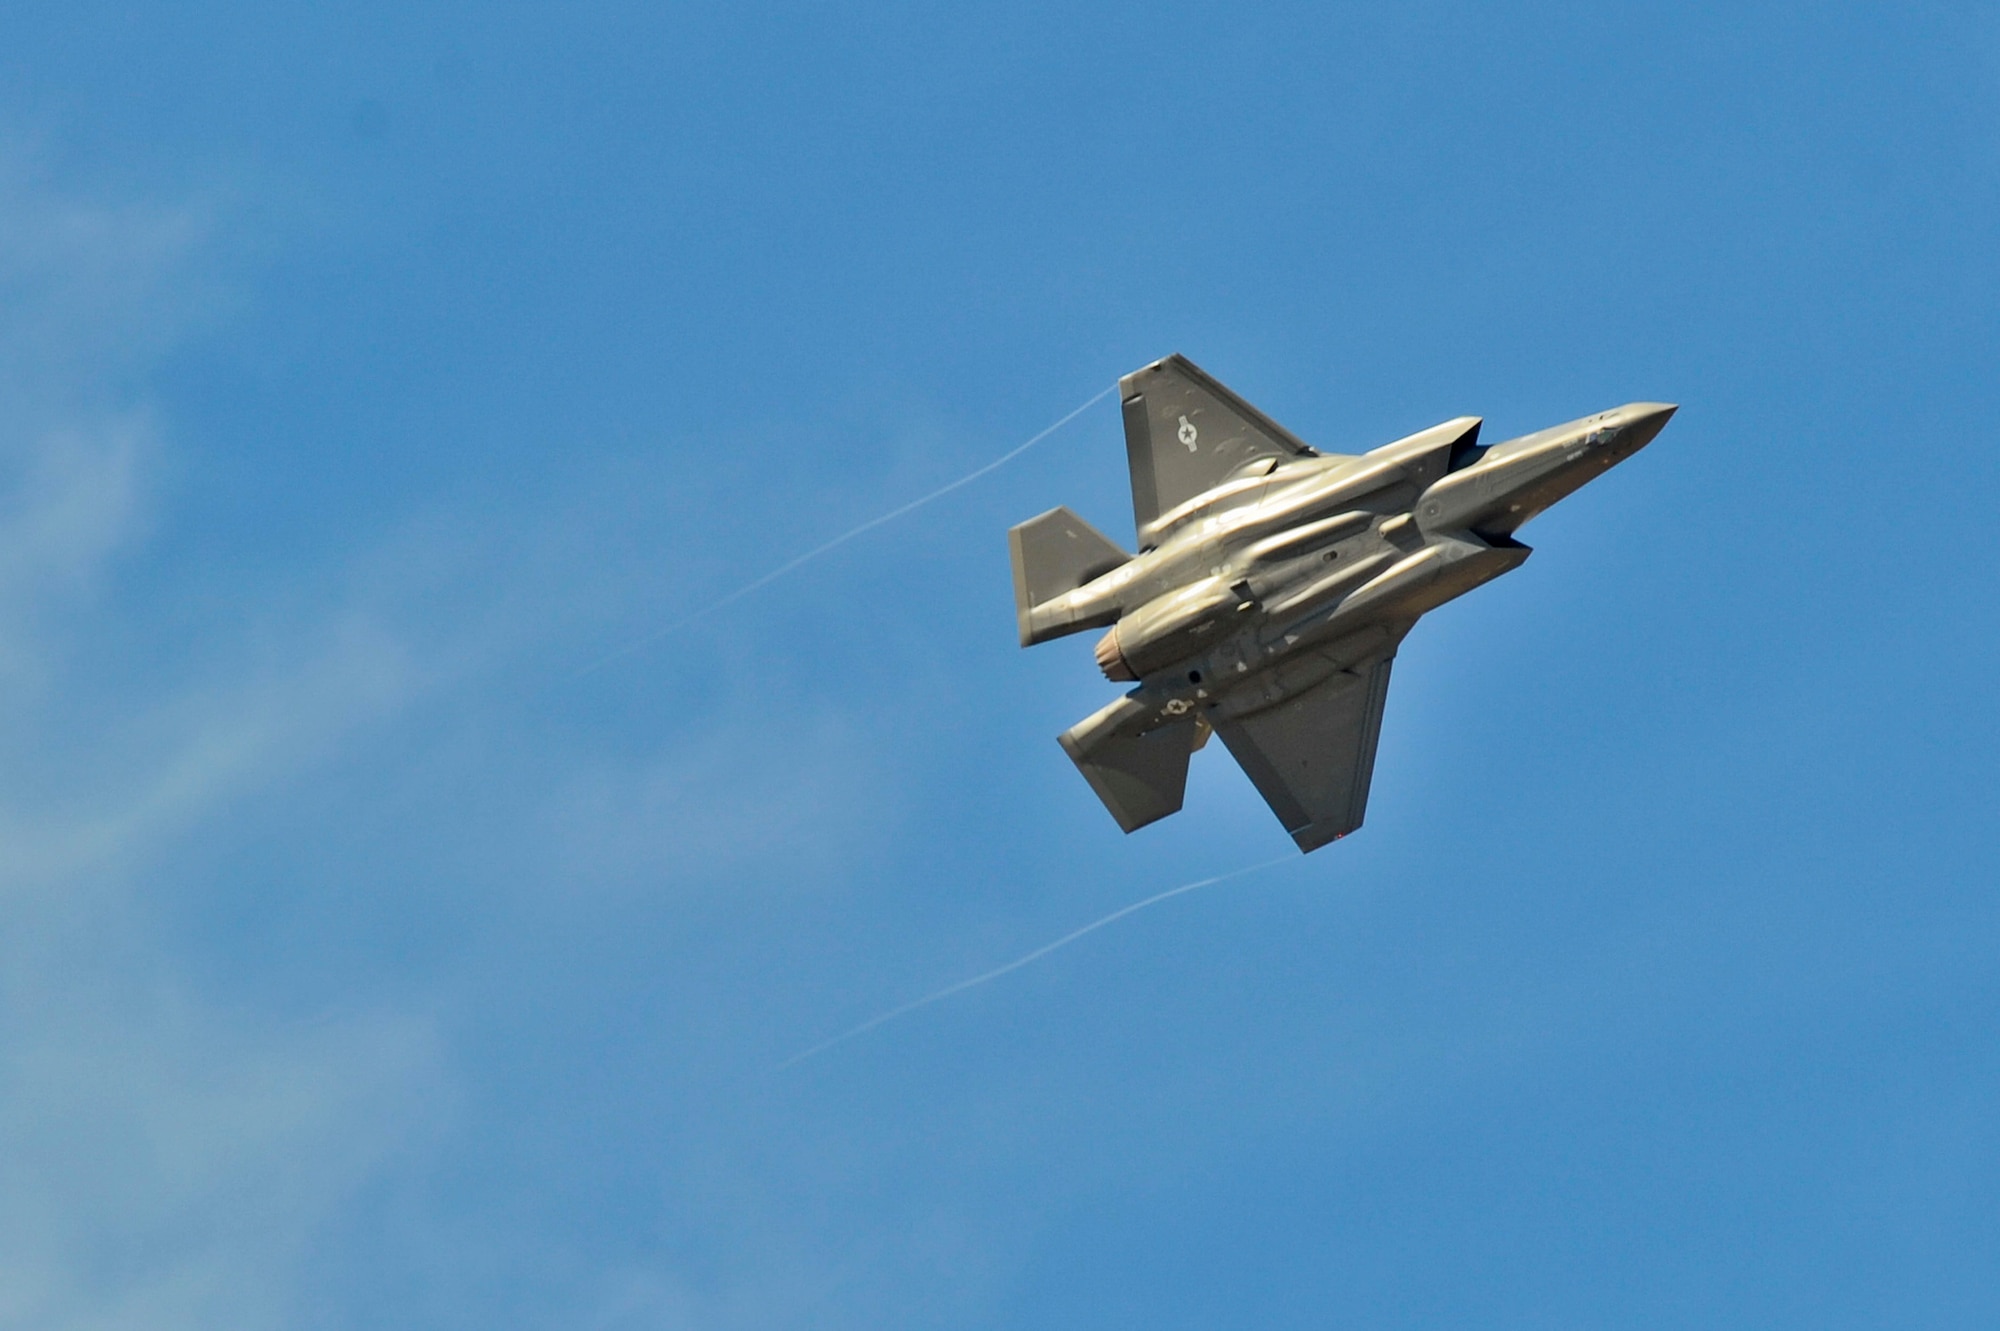 Luke Air Force Base's first F-35 Lightning II flies overhead March 10, 2014, before it lands on base for the first time. The aircraft is the first of 144 F-35s that will eventually be assigned to the base. (U.S. Air Force photo/Staff Sgt. Darlene Seltmann) 